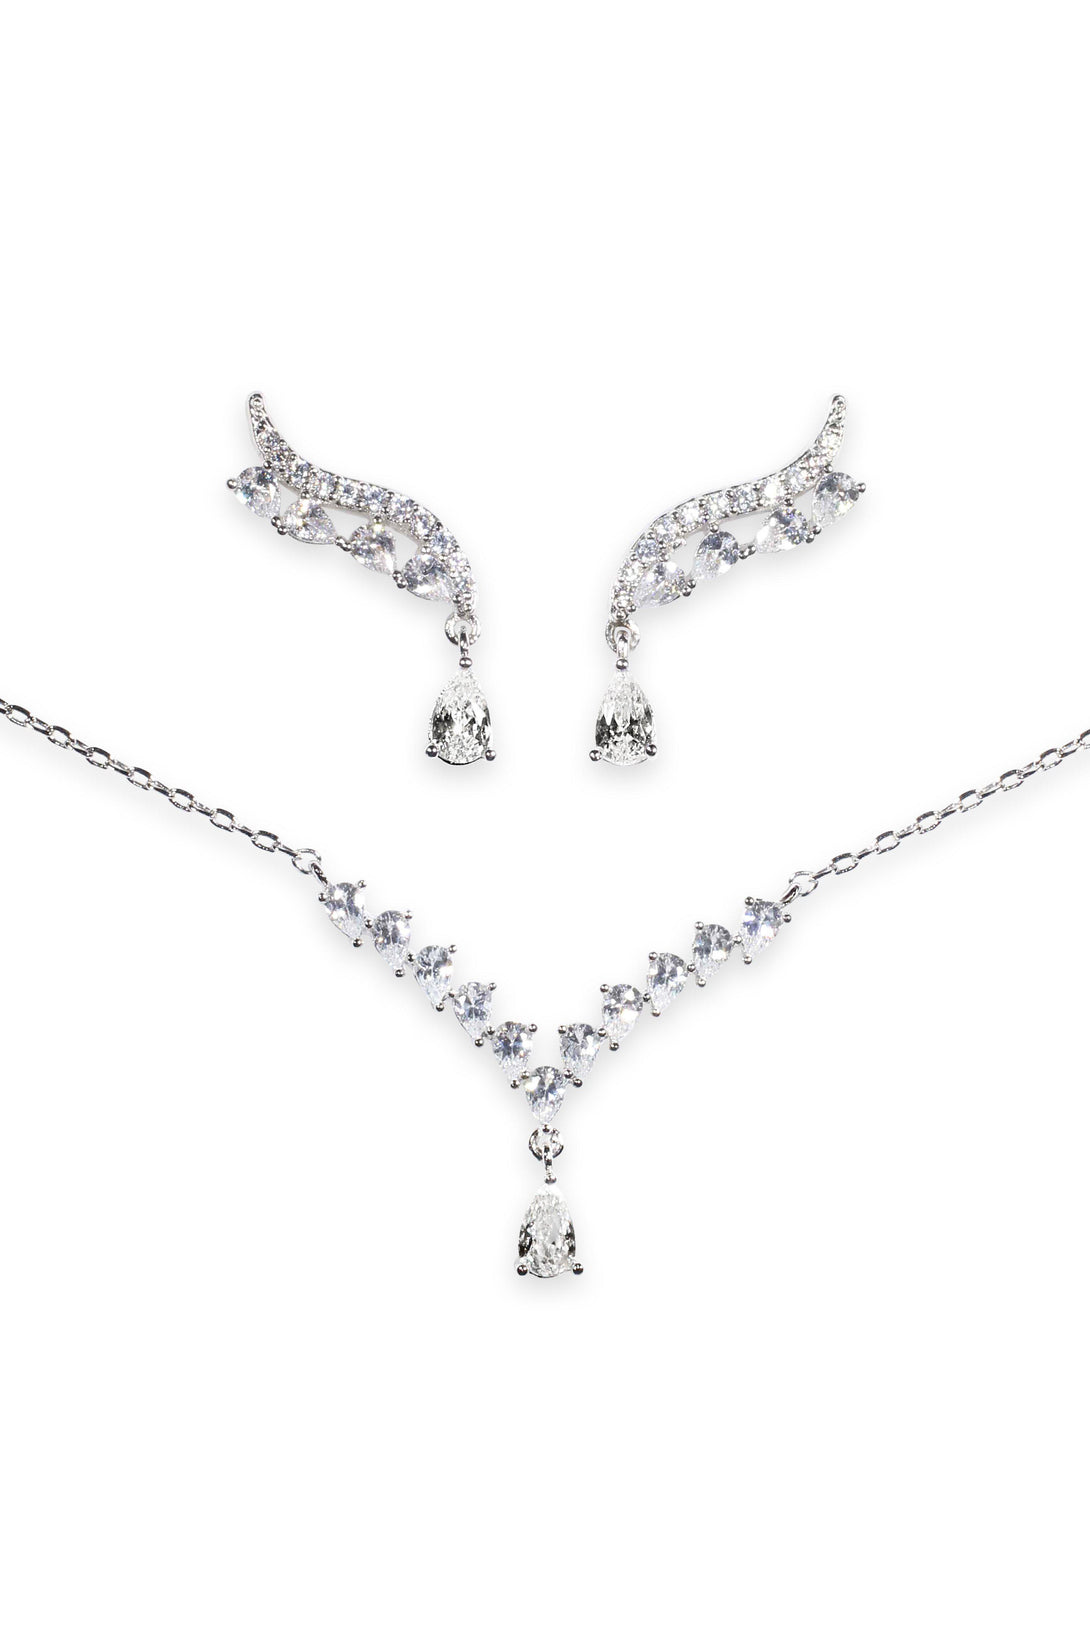 Glamour Set Designer Collection Crystal Drops in Sterling Silver (Earrings, Necklace)